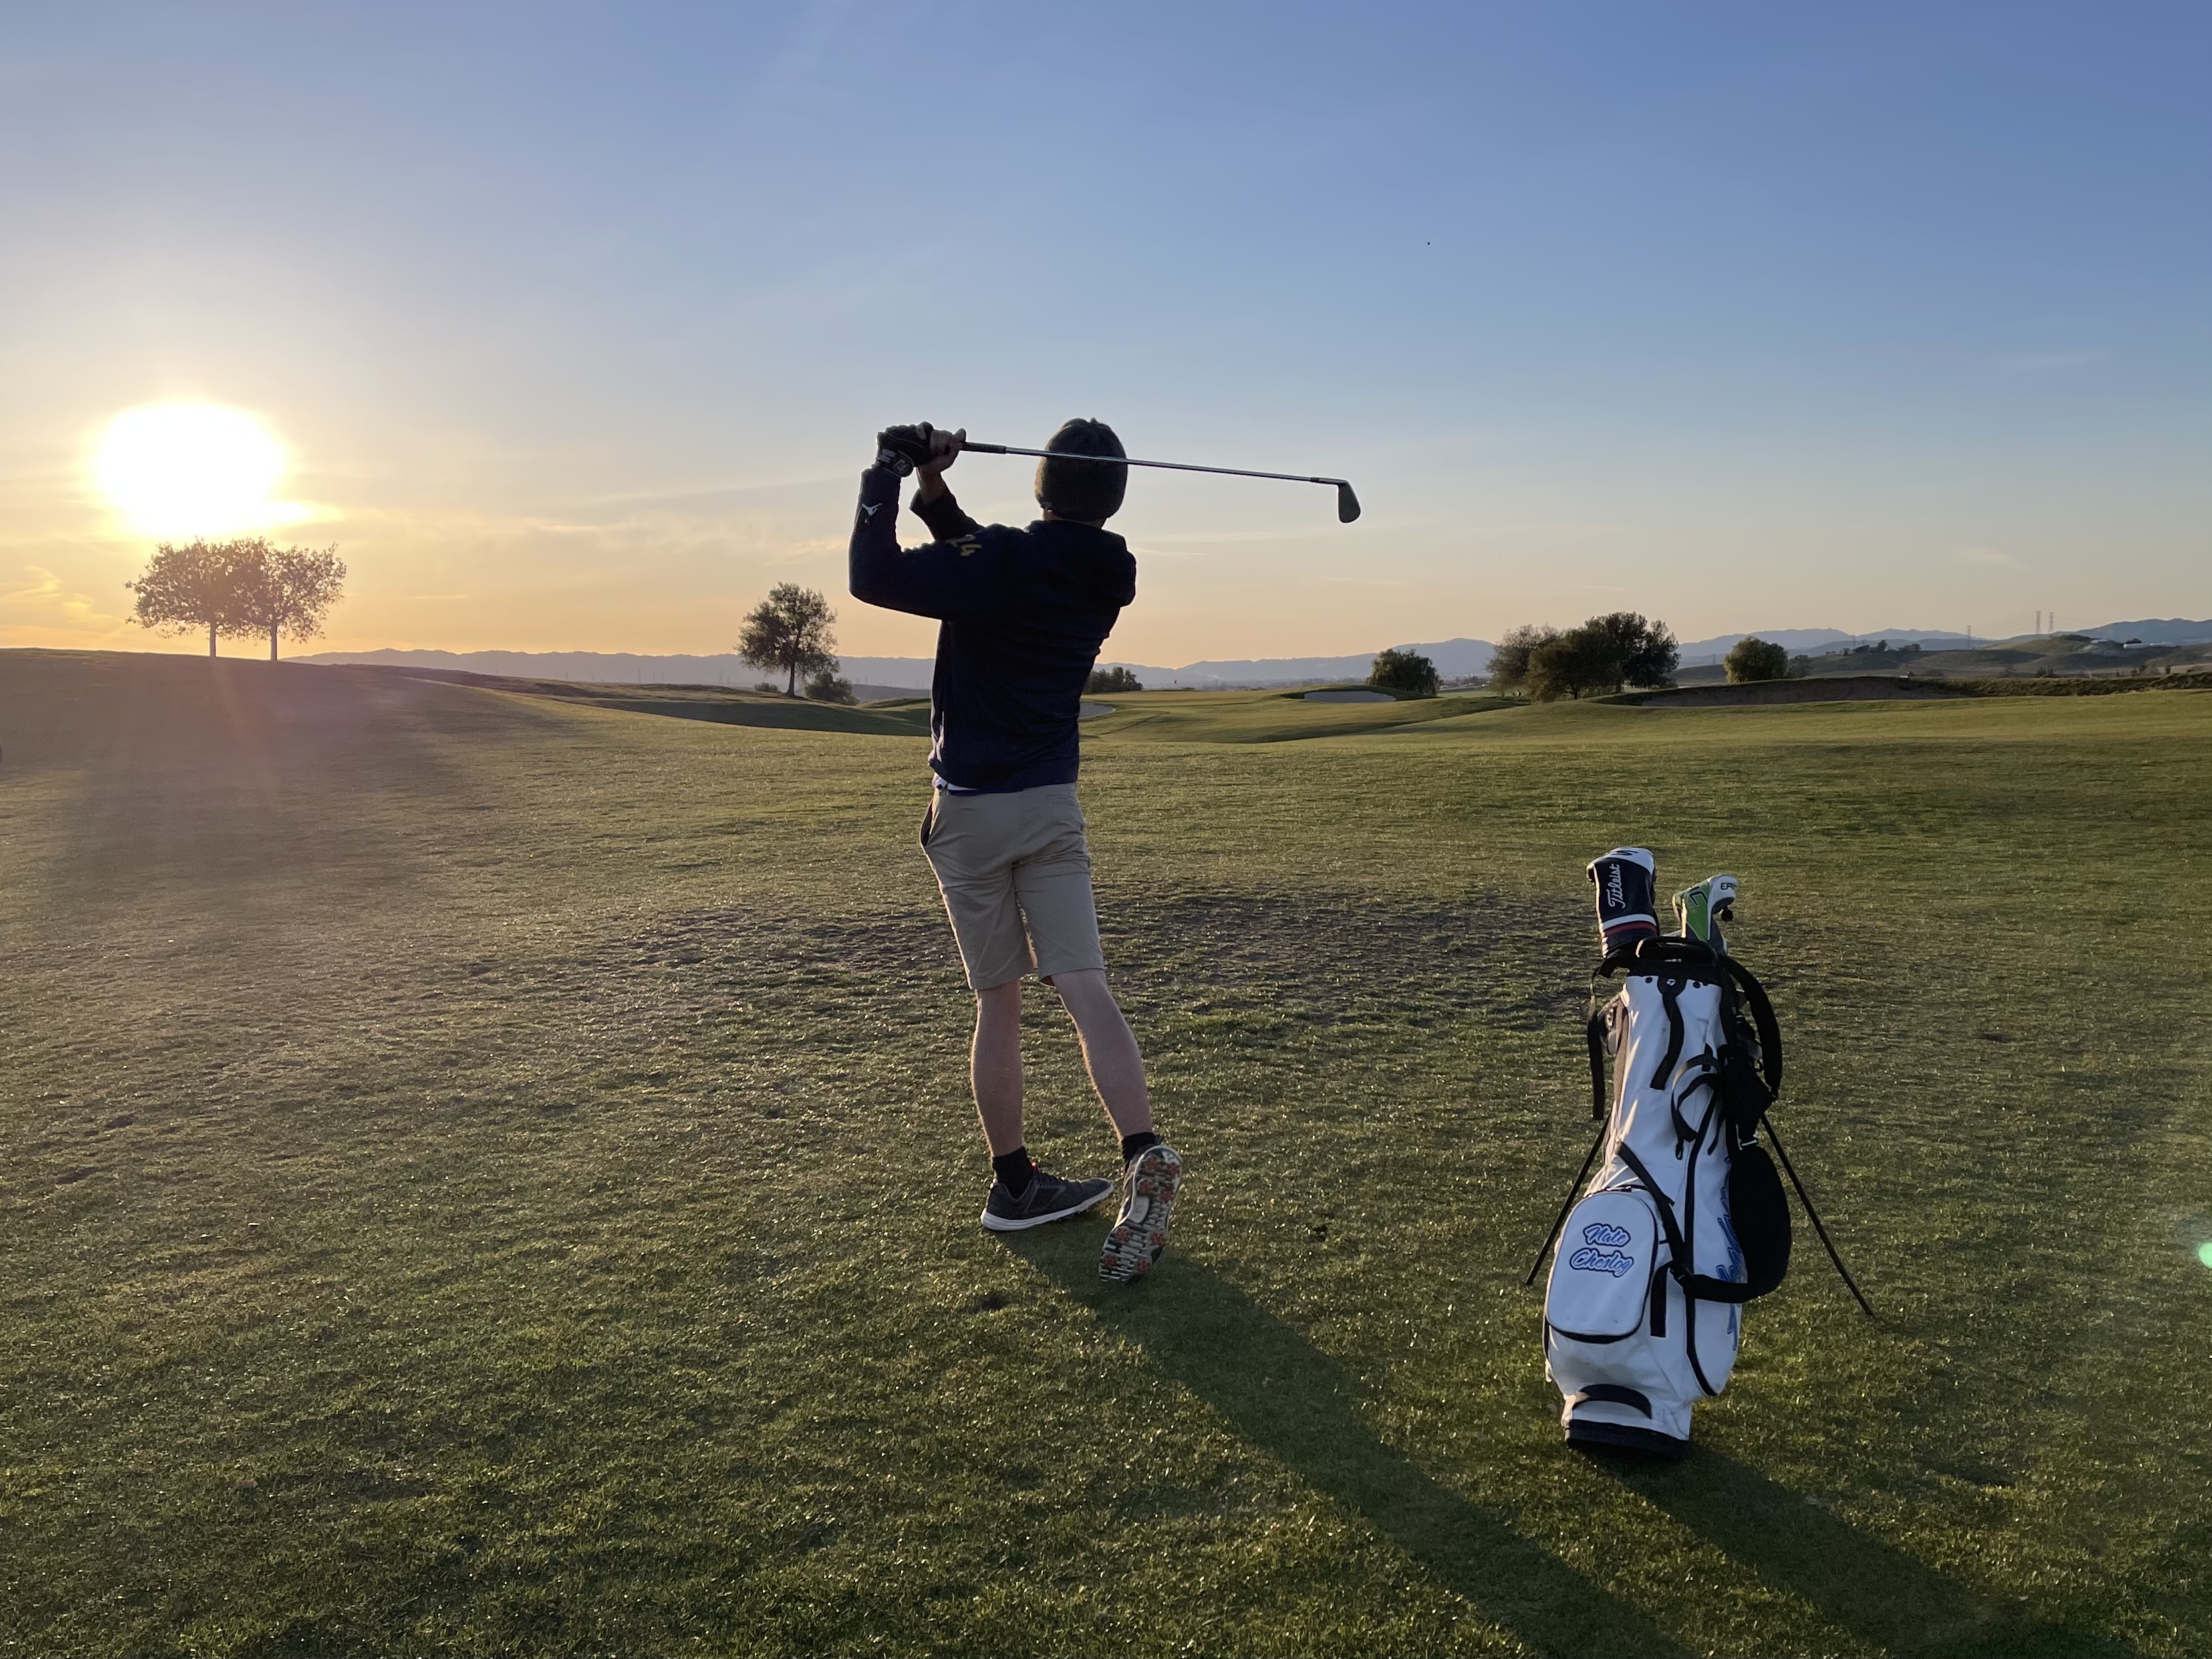 Natanael (Nate) Cheslog golfing at sunset at Poppy Ridge Golf Course in Livermore California